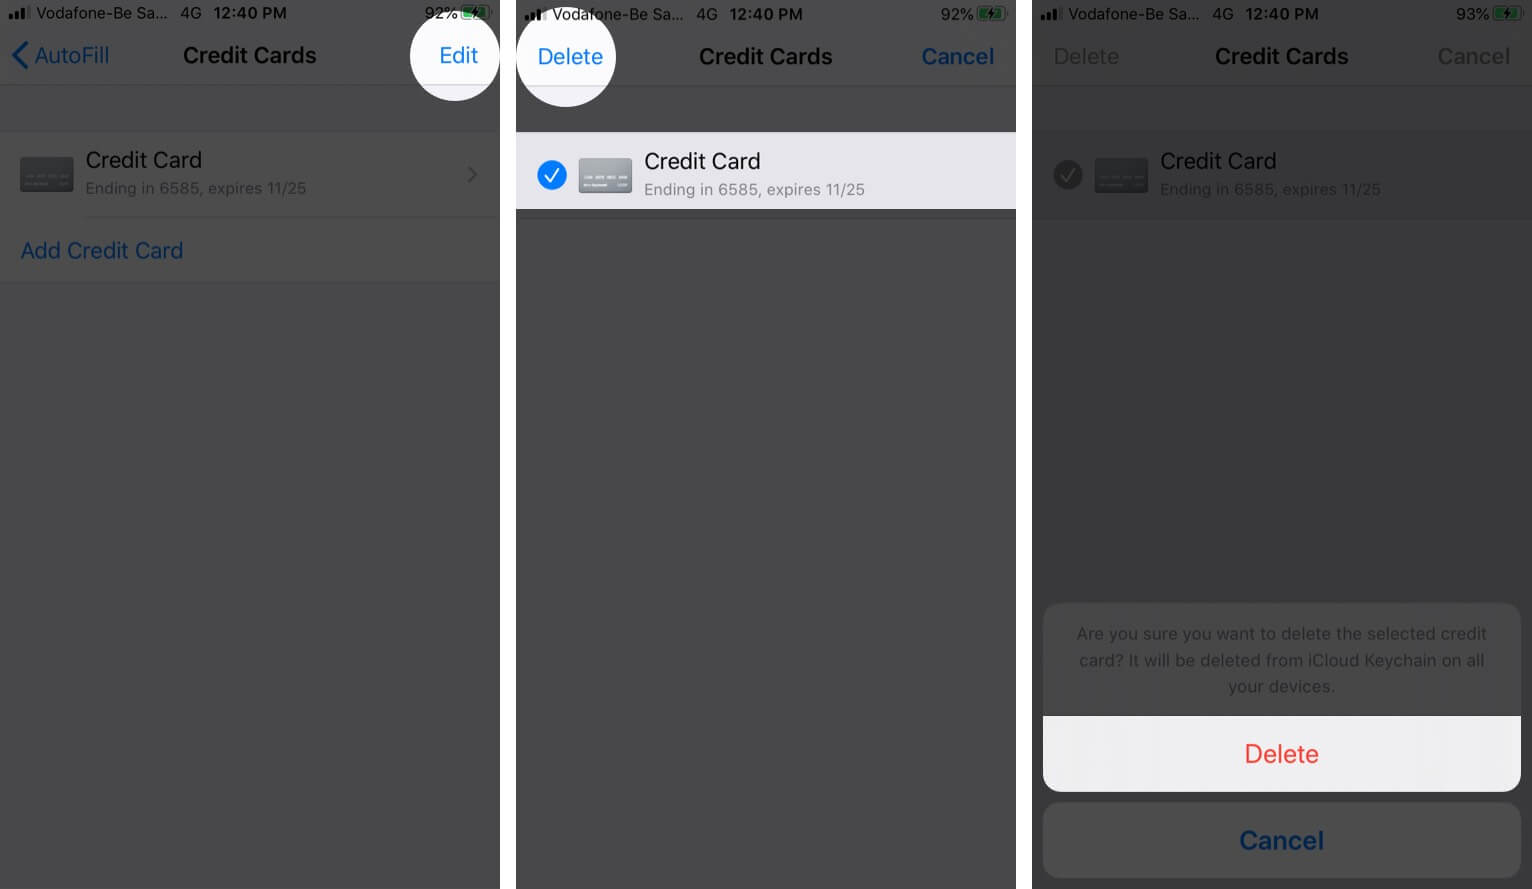 Delete Credit Card Details from iCloud Keychain on iPhone